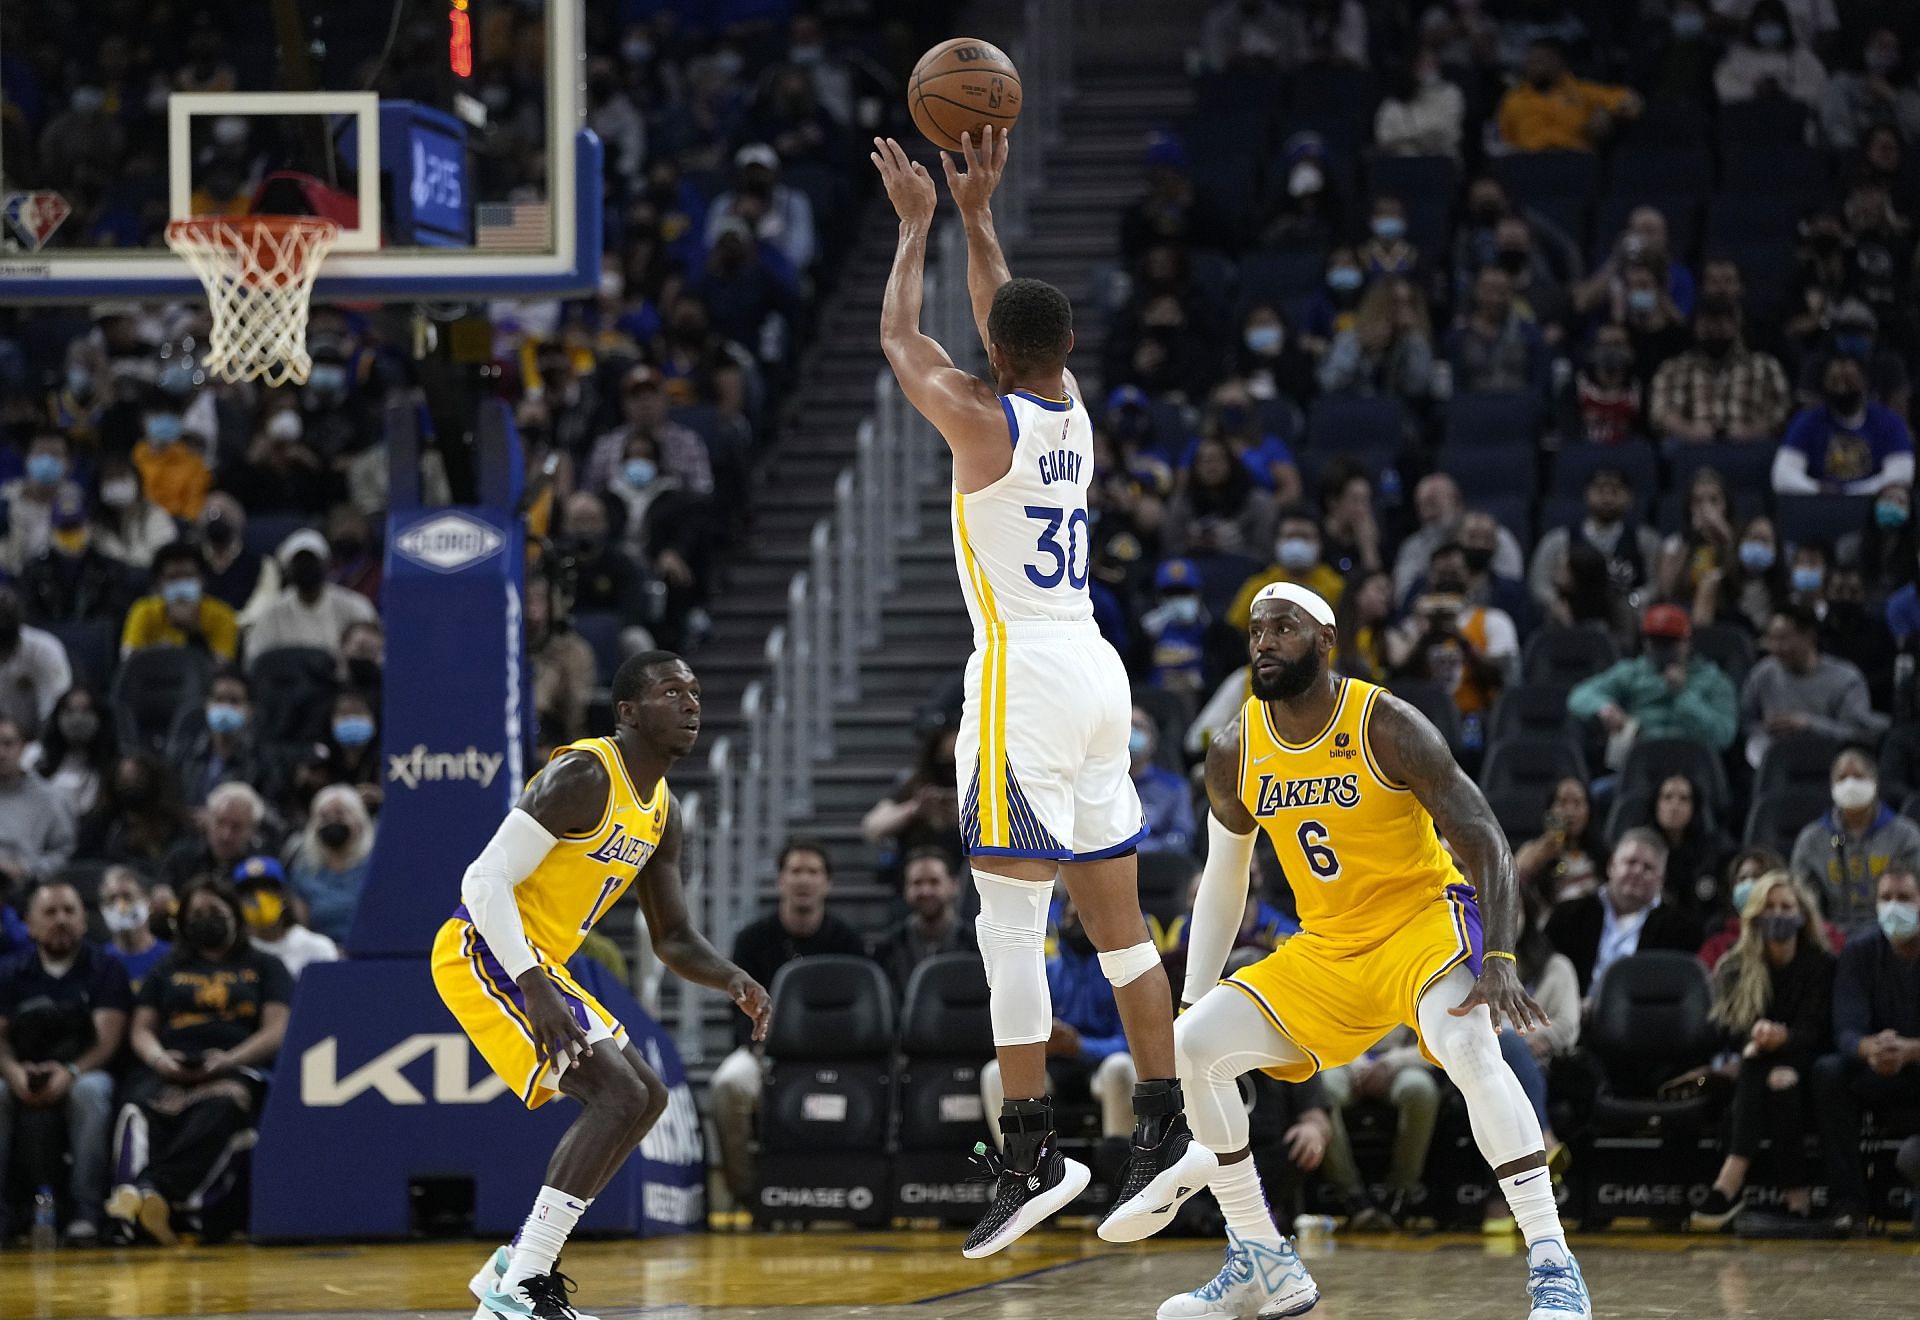 Stephen Curry shooting a three-pointer against the Los Angeles Lakers